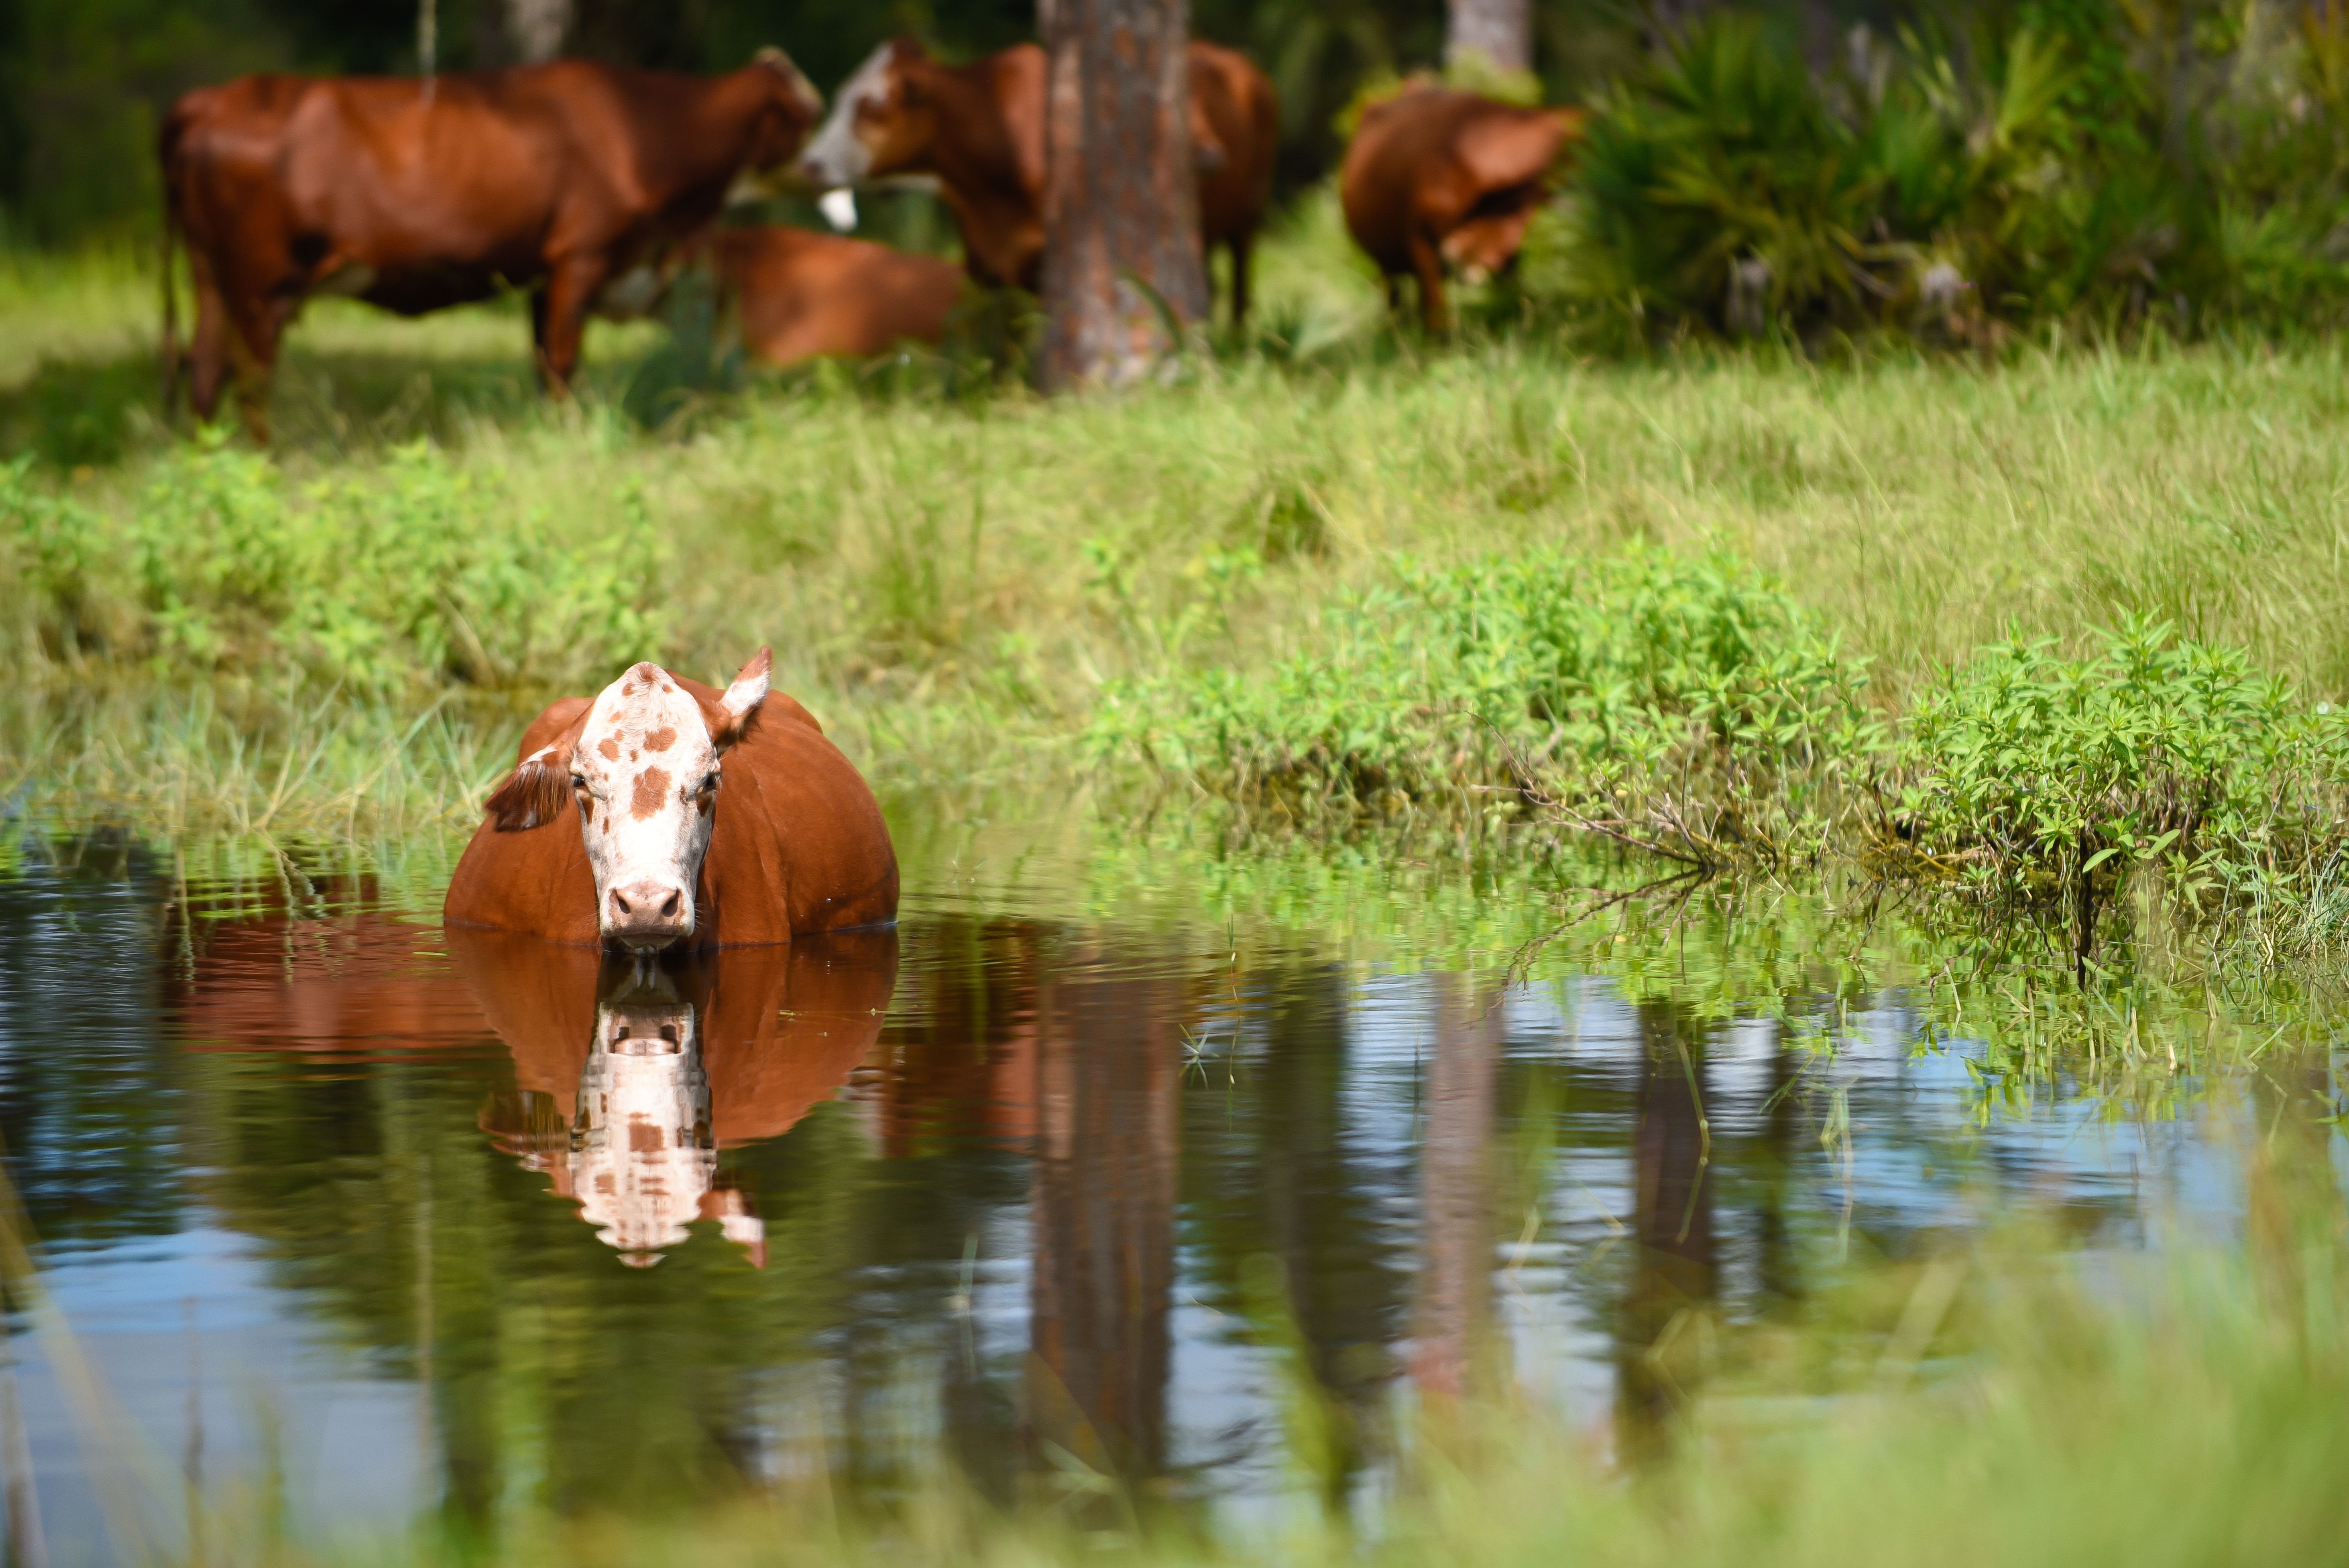 A cow stands in water